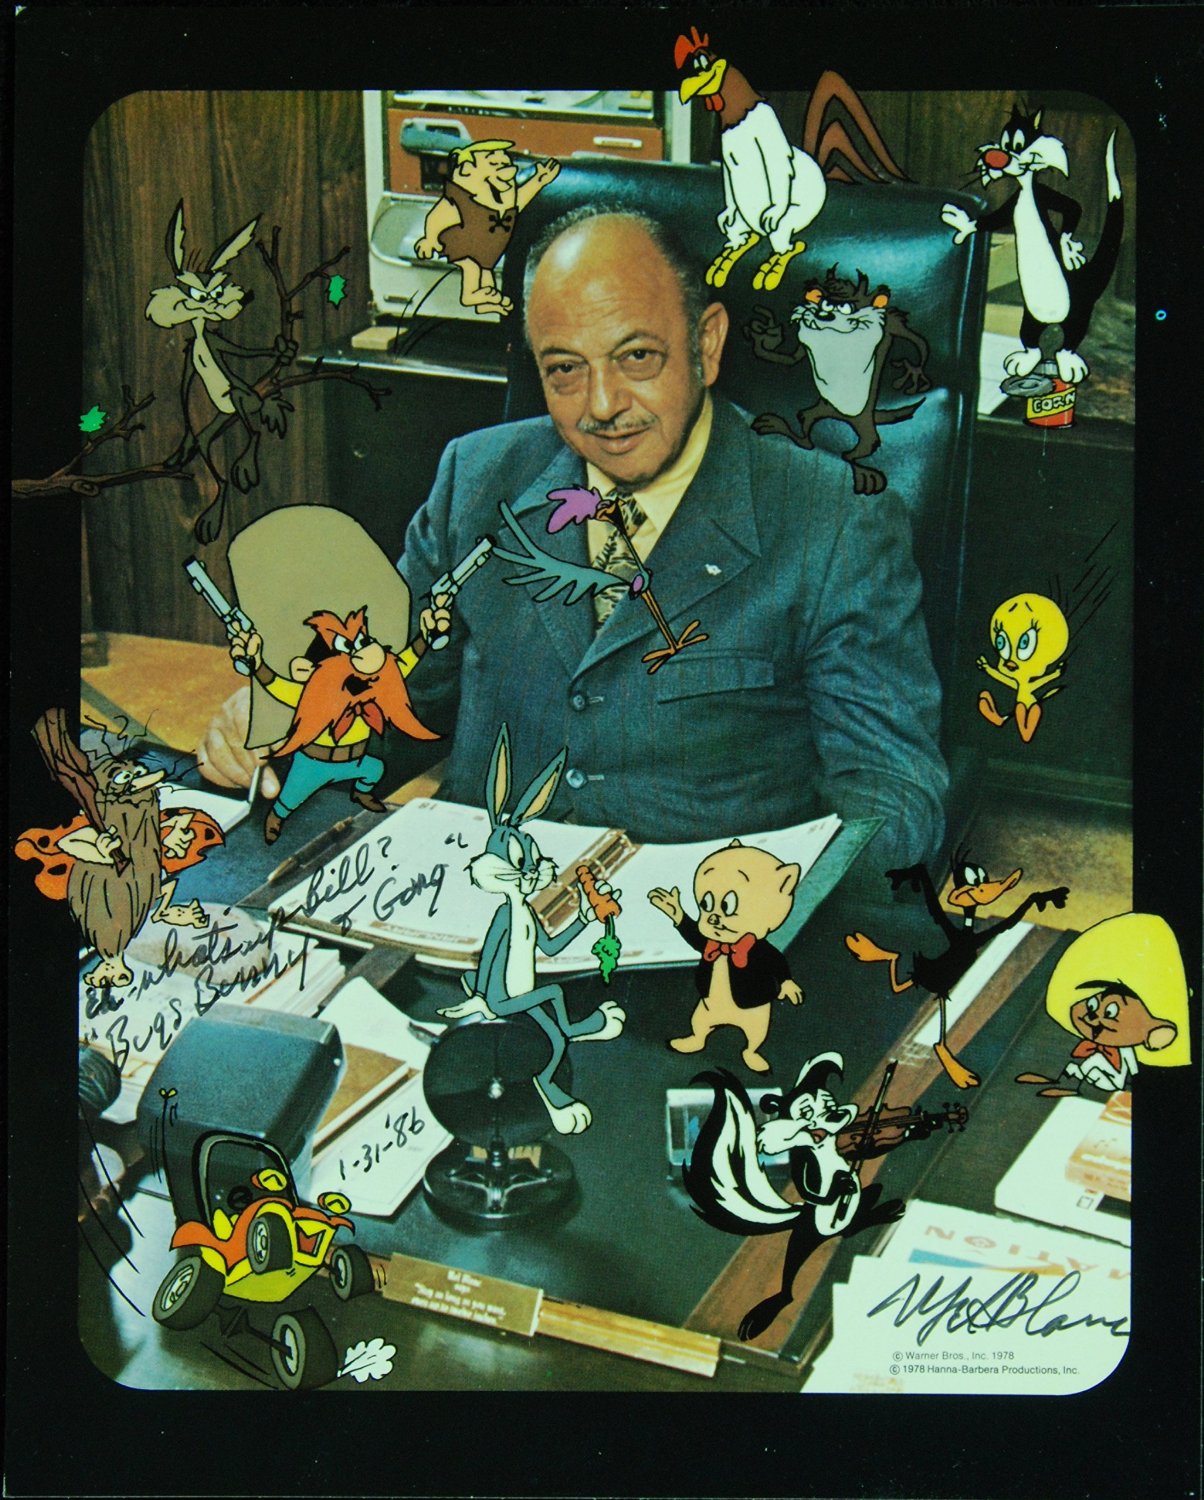 Mel Blanc doesn't have enough to do - from the Abbott and Costello radio show, Bank Robbery with Marlene Dietrich